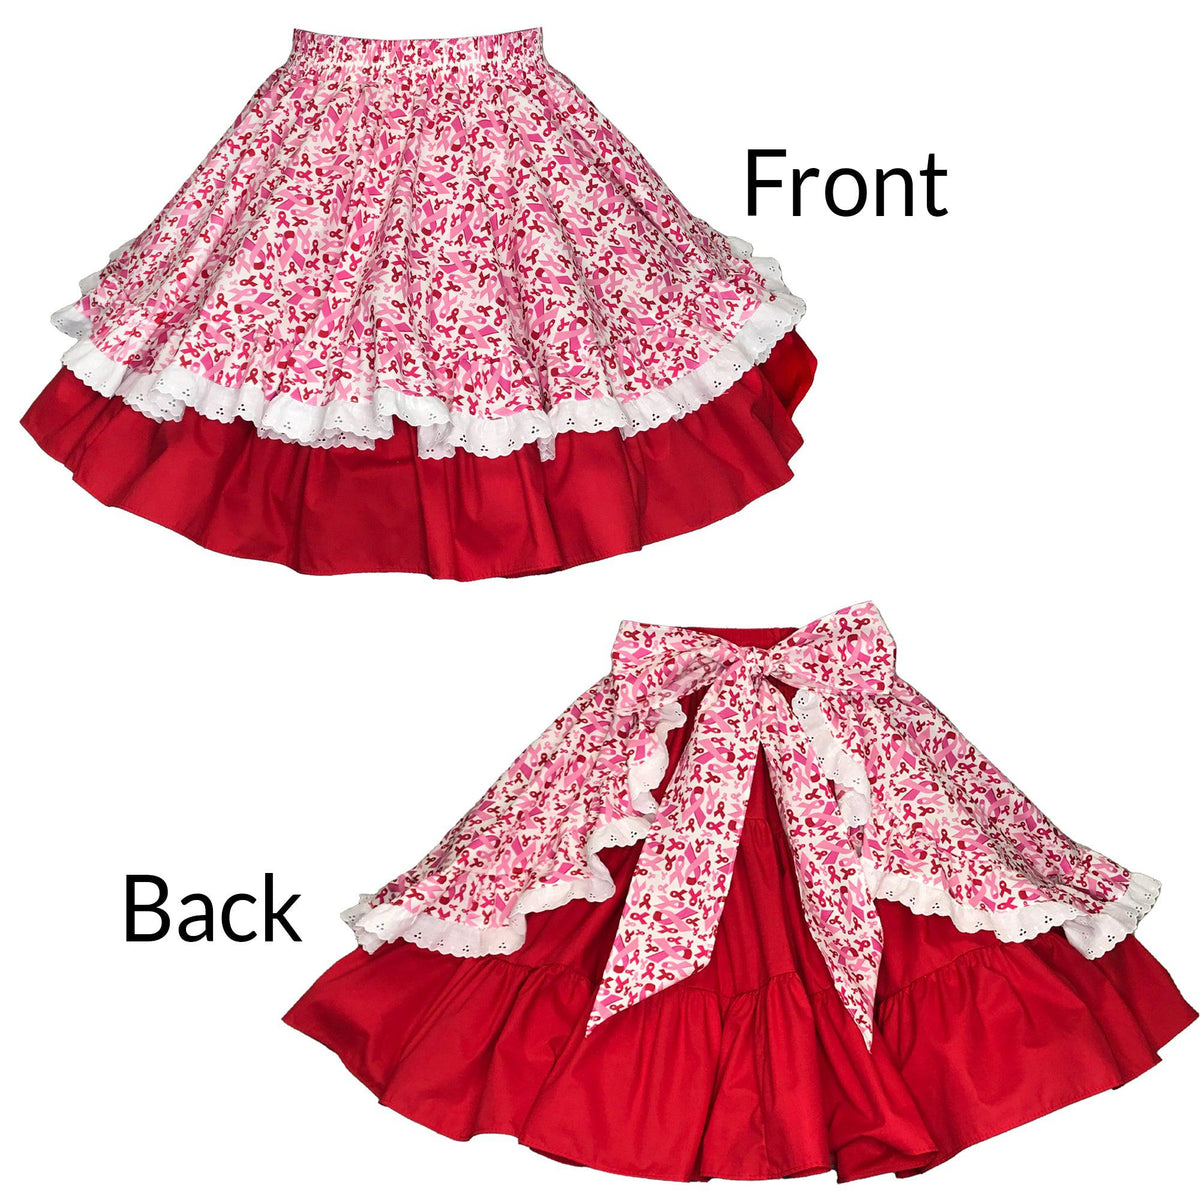 A pair of red and white Pink Ribbon Aprons with ruffles and pink ribbons by Square Up Fashions.